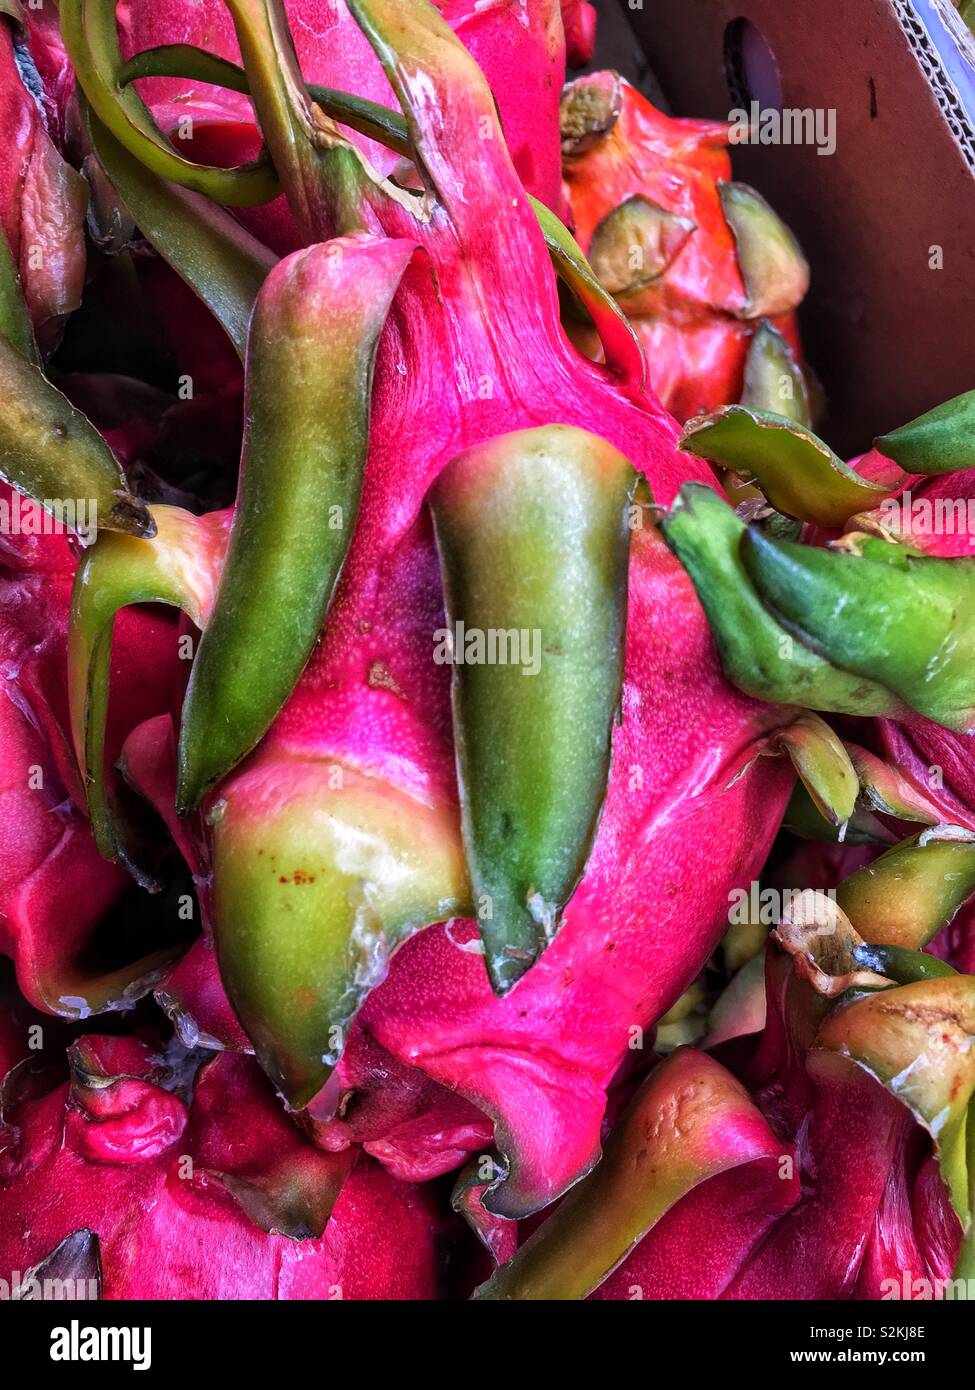 Full frame of fresh delicious ripe perfect dragon fruit, thang, Hylocereus, pitahaya, pitaya, pitaya roja, strawberry pear on display and for sale at the local produce market. Stock Photo